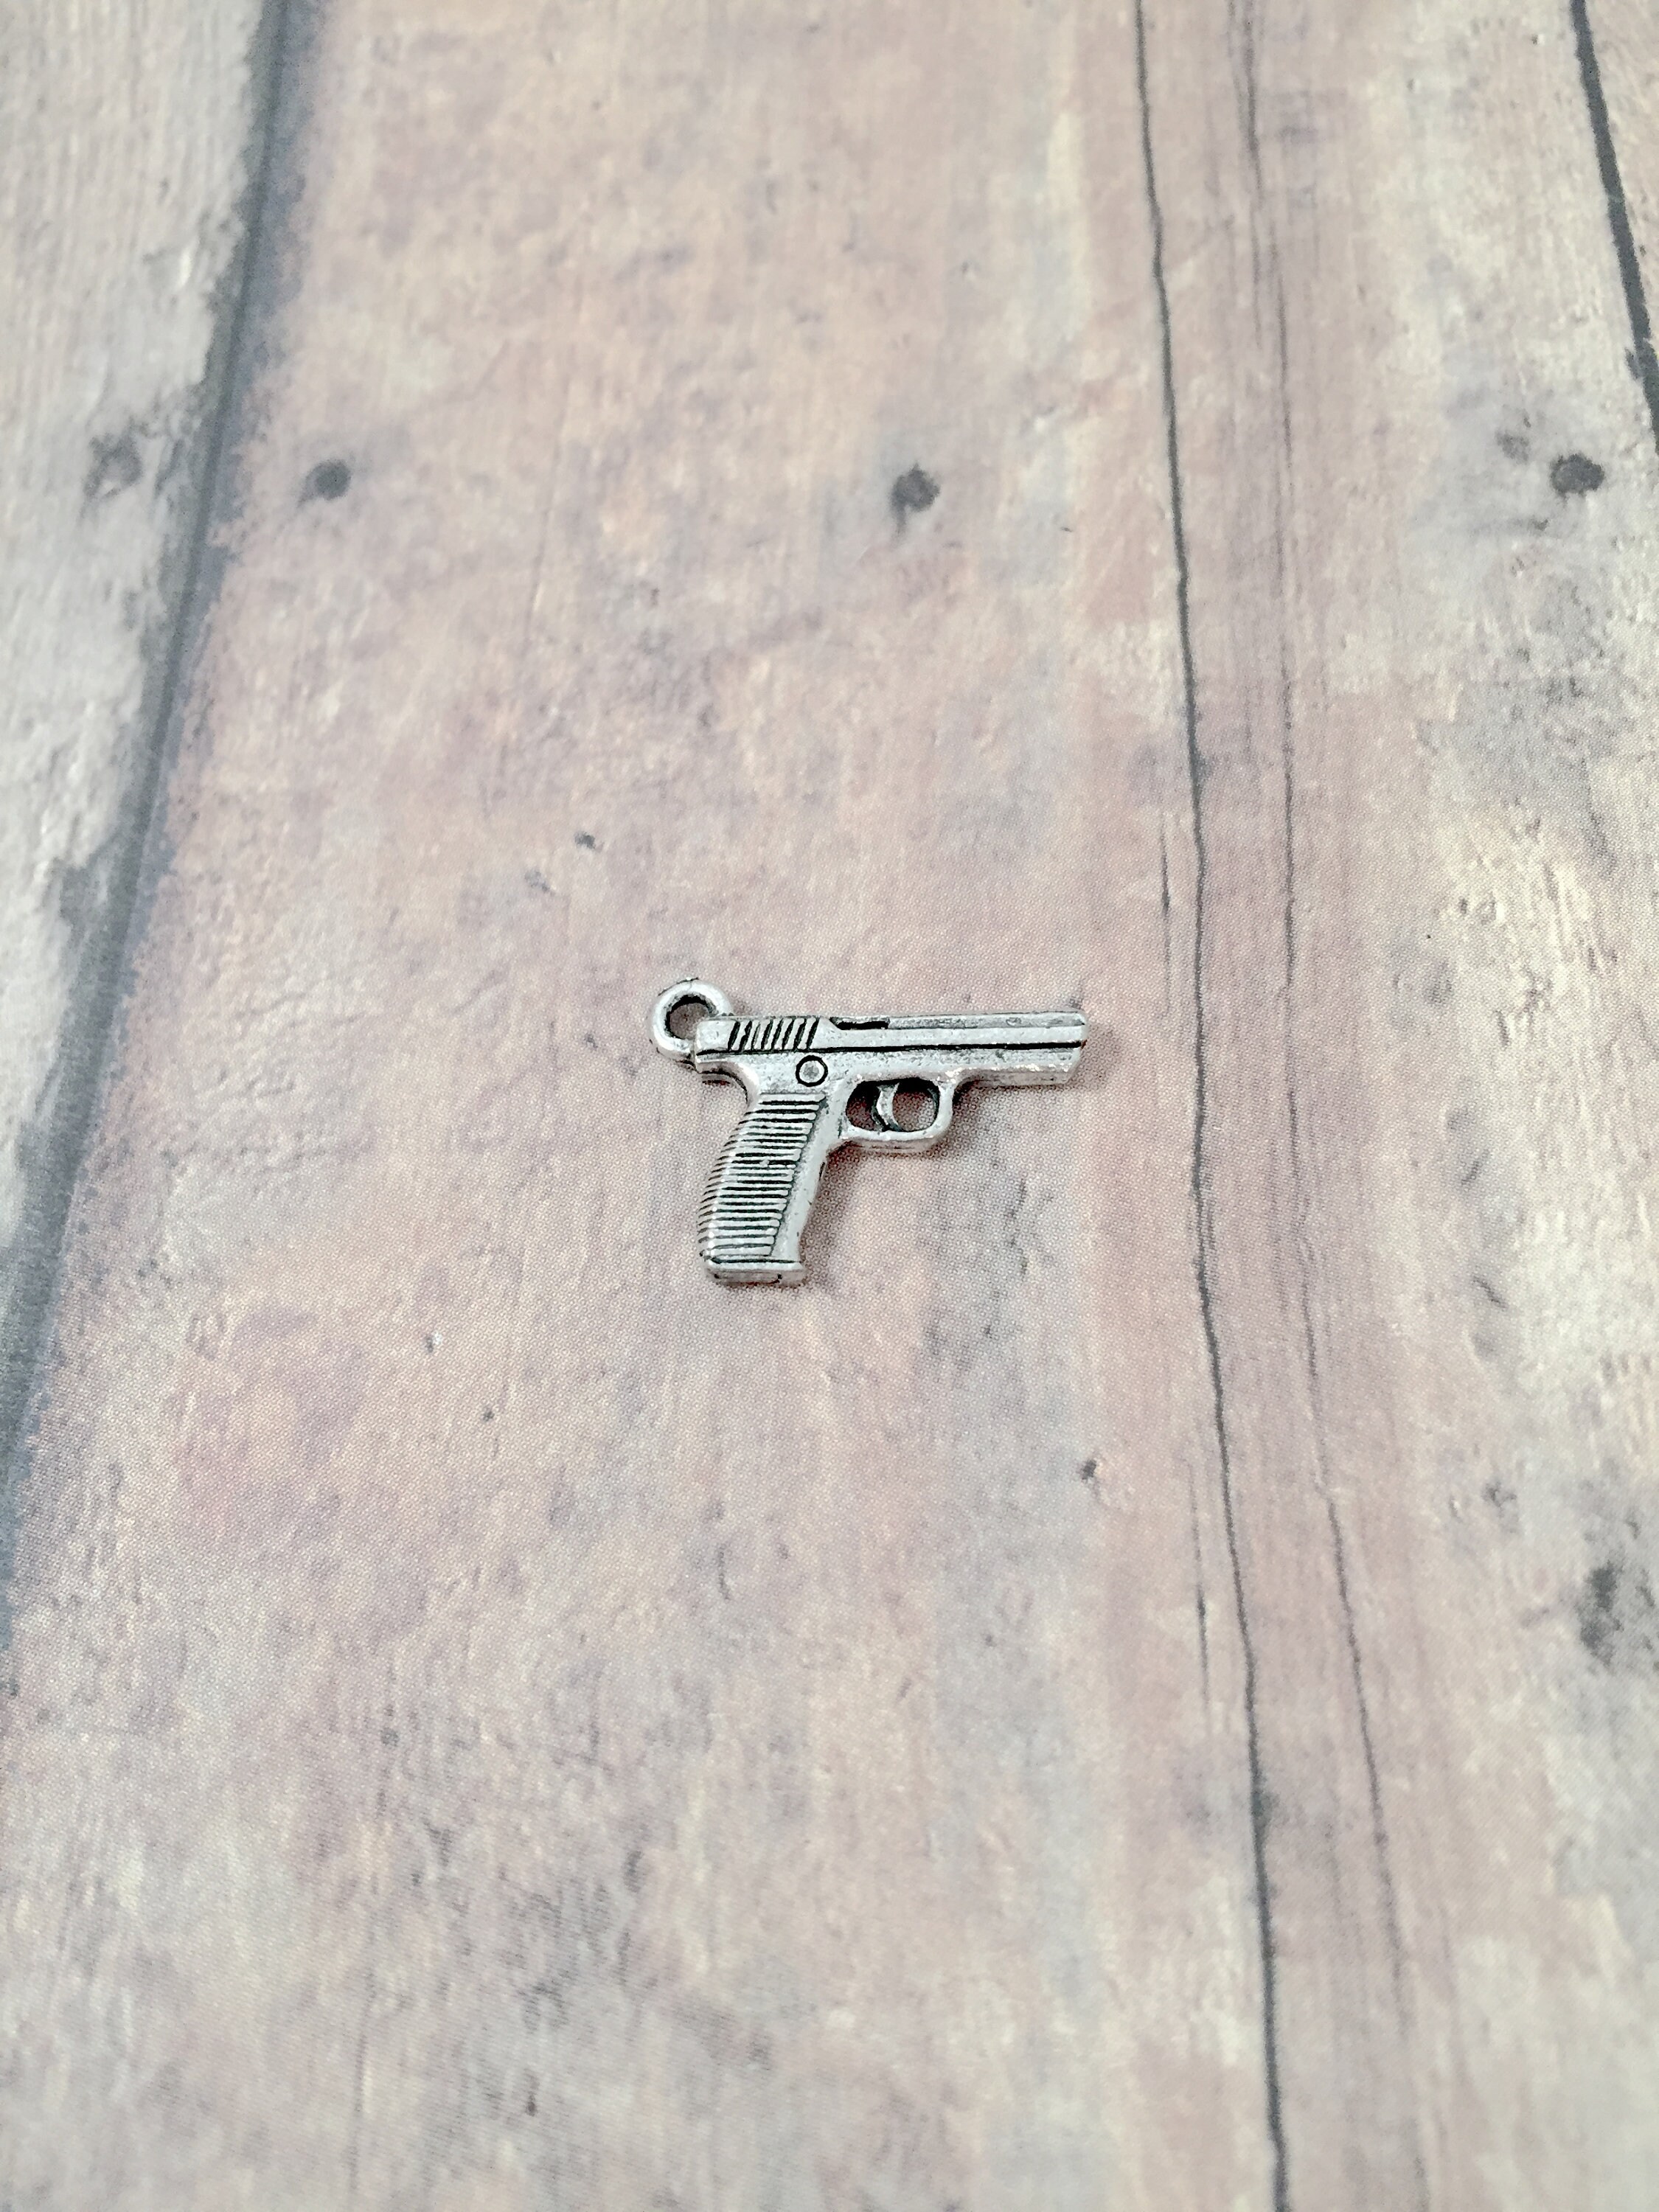 Gun Charms Pistol Antiqued Silver Texas Jewelry Making Supplies